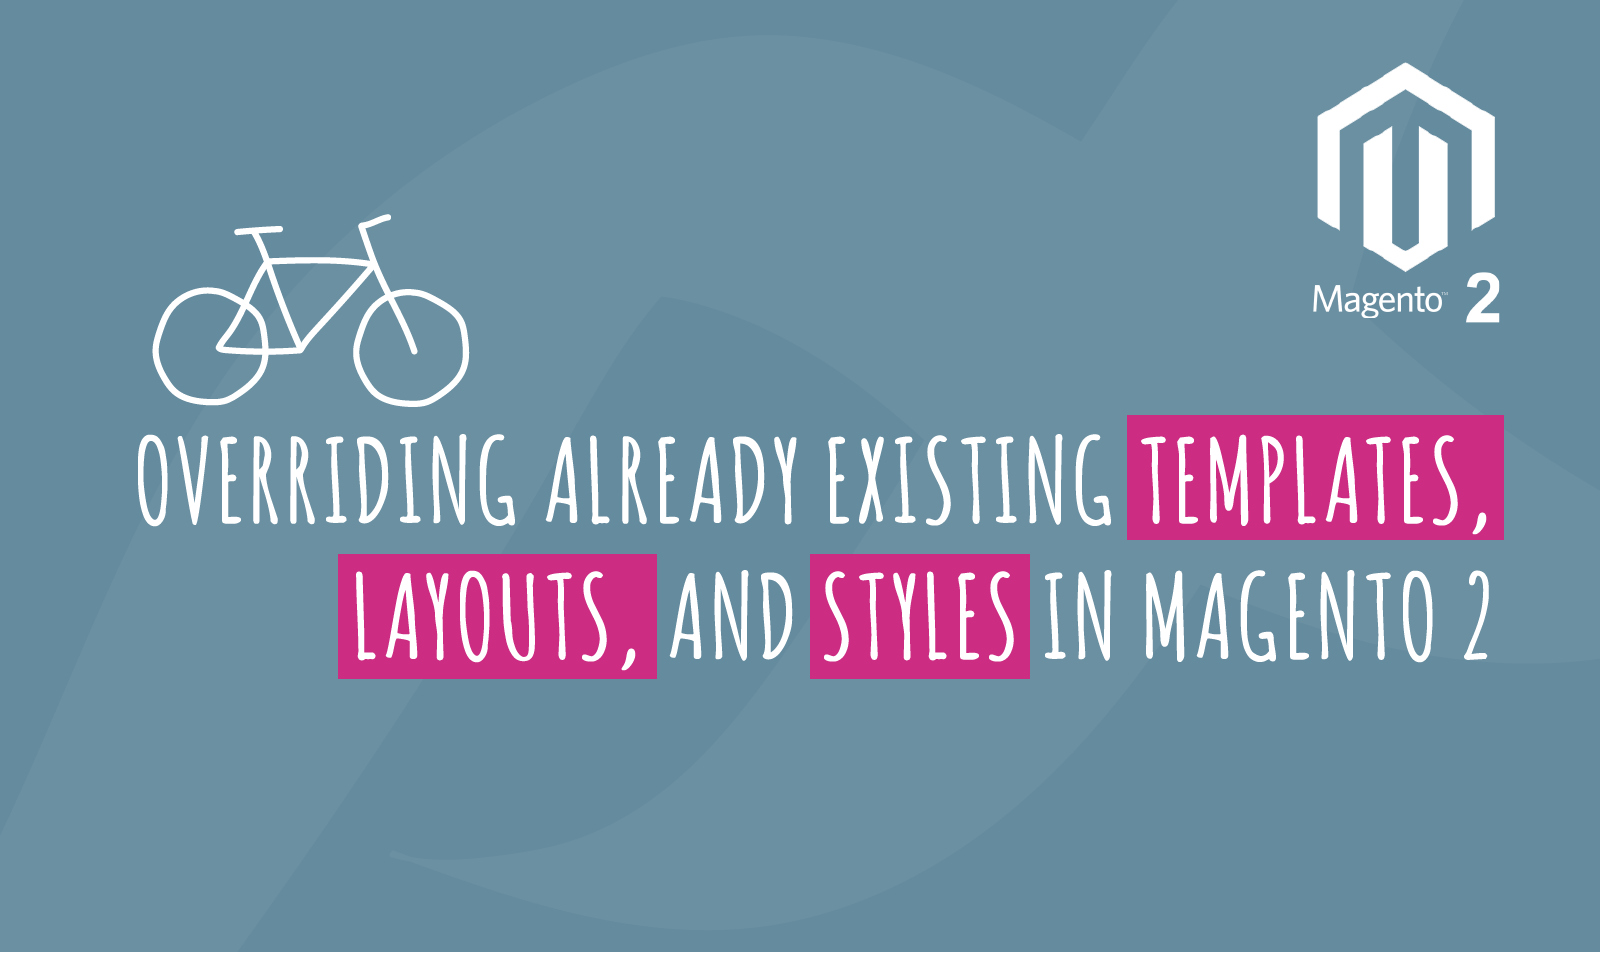 OVERRIDING ALREADY EXISTING TEMPLATES, LAYOUTS, AND STYLES IN MAGENTO 2